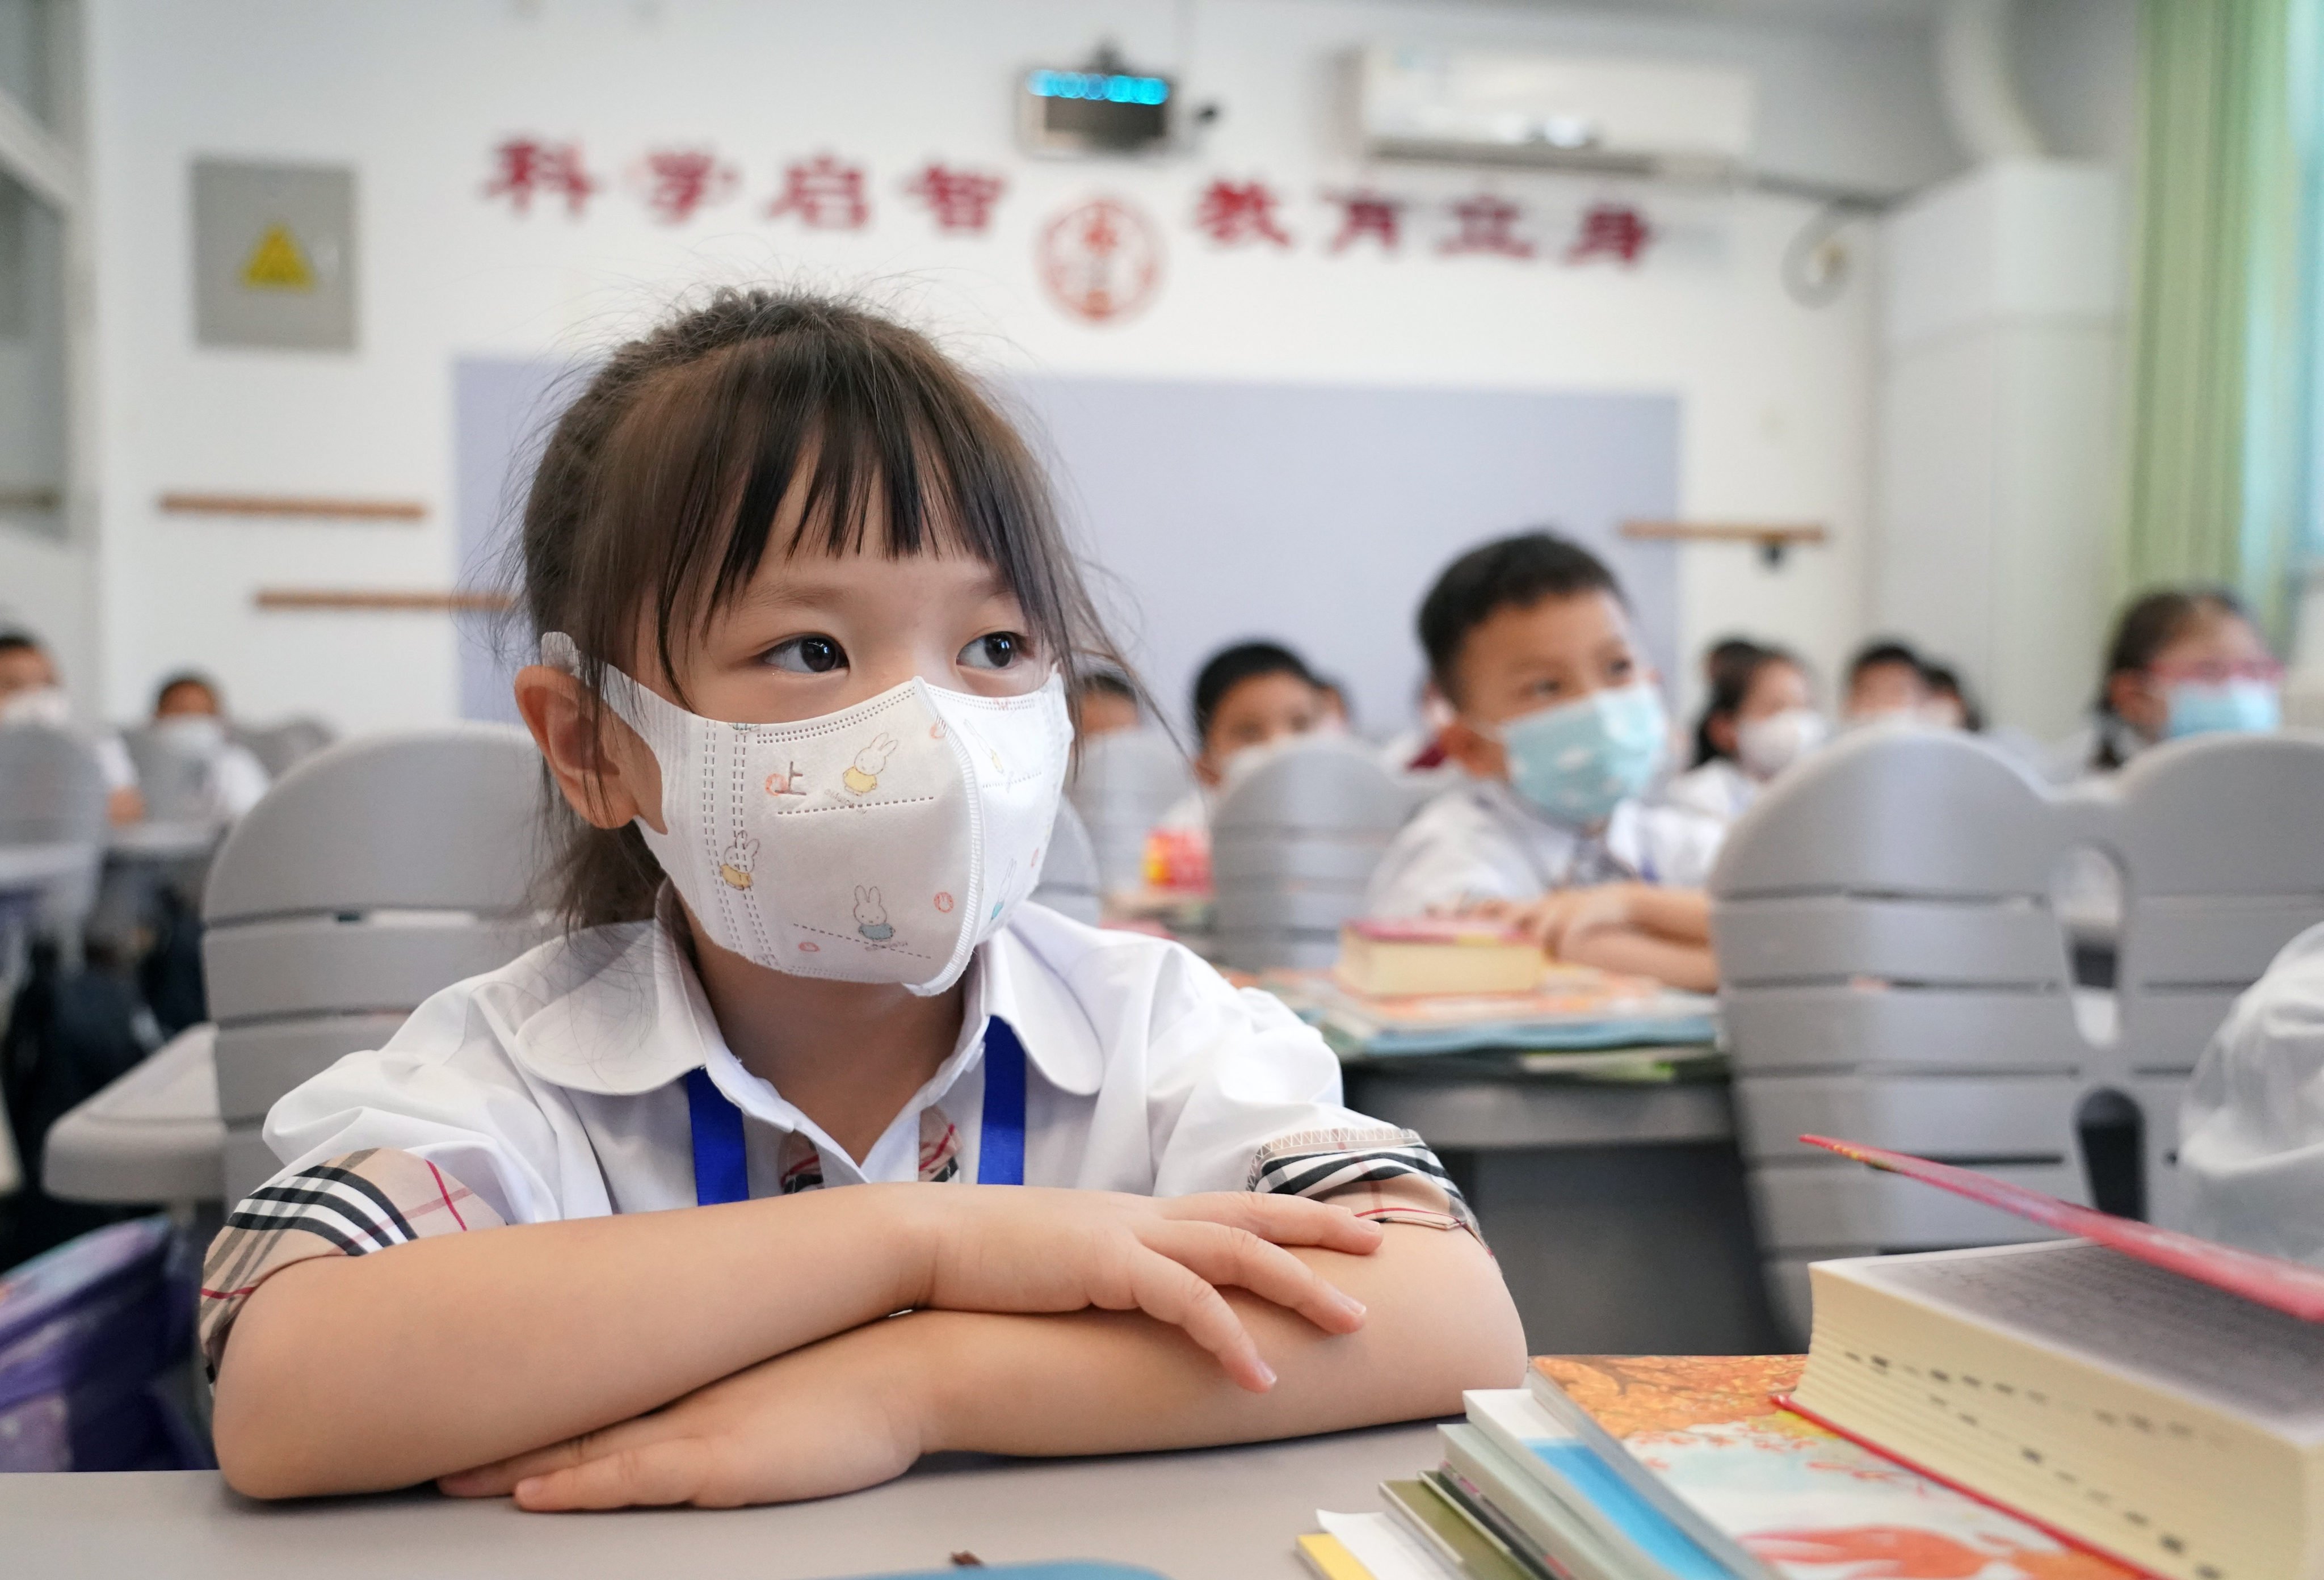 At Zhongguancun No 1 Primary School in Haidian district of Beijing, students attend class with masks. Photo: Xinhua